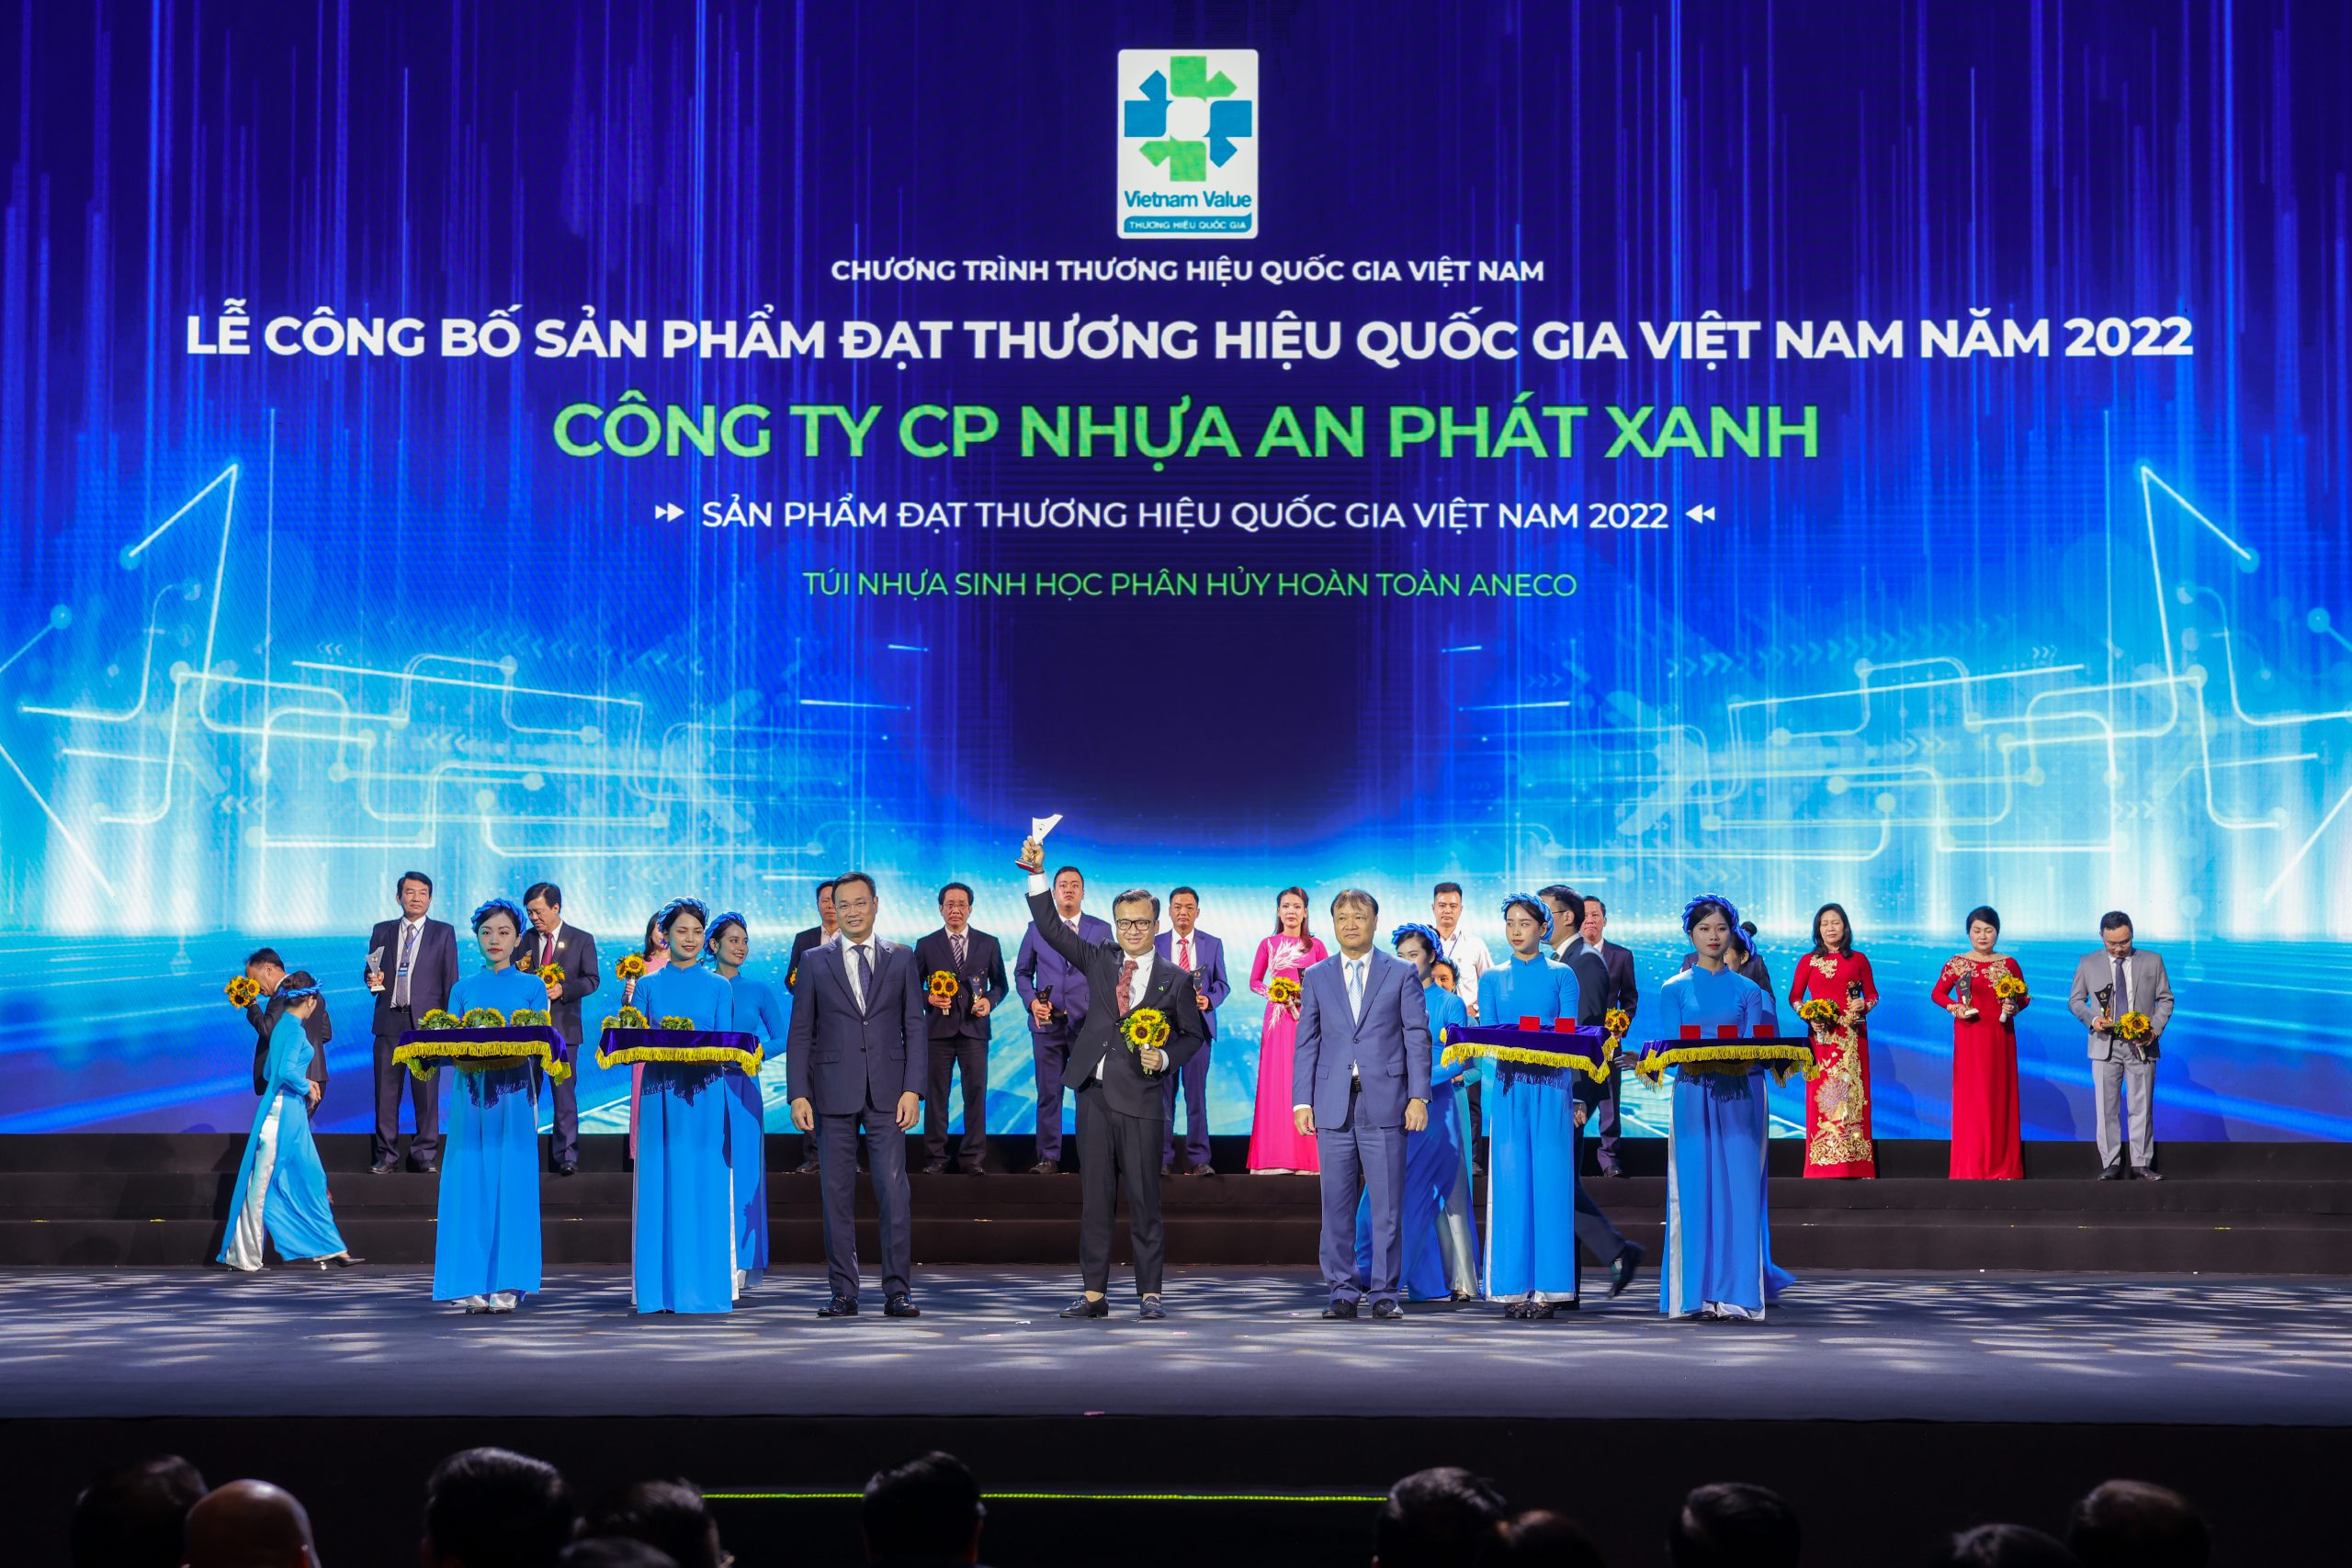 Compostable products honored as Vietnam’s National Brand for the first time